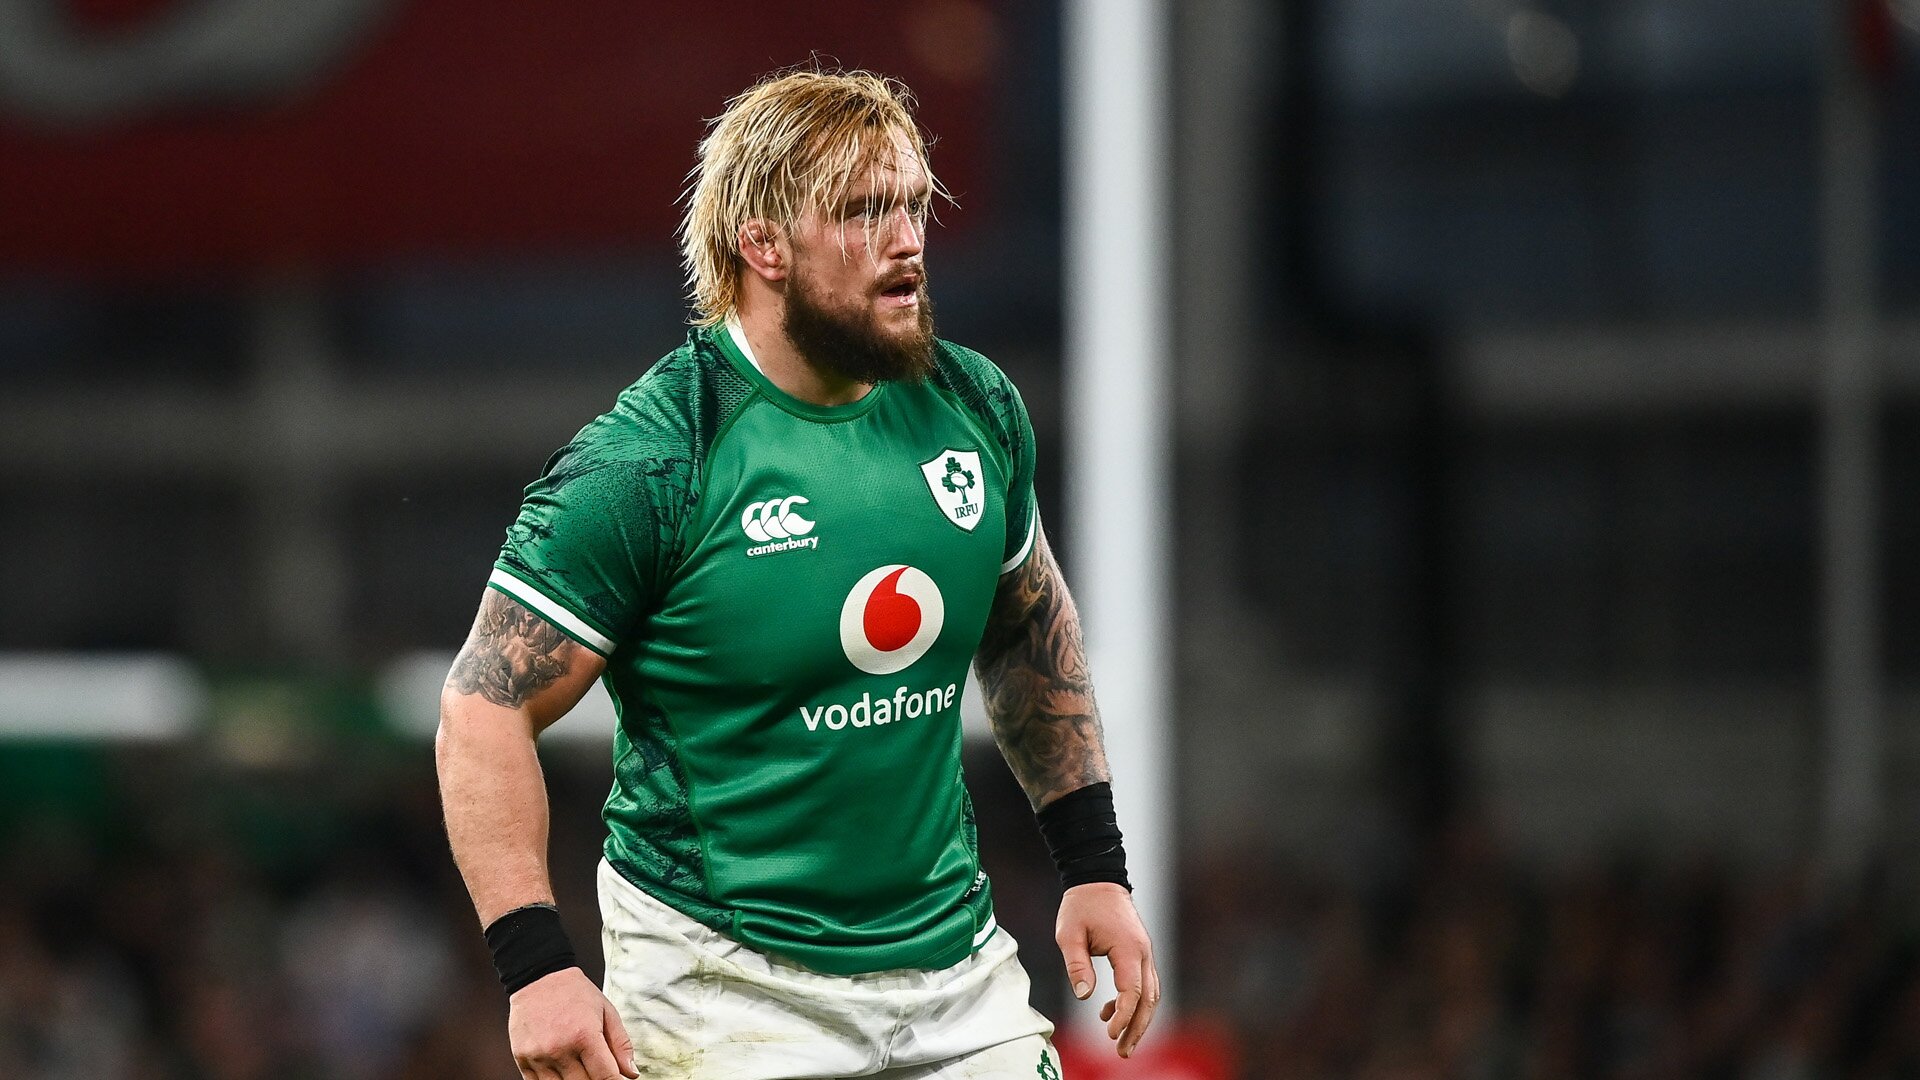 Ireland prop Andrew Porter ruled out of remainder of Six Nations